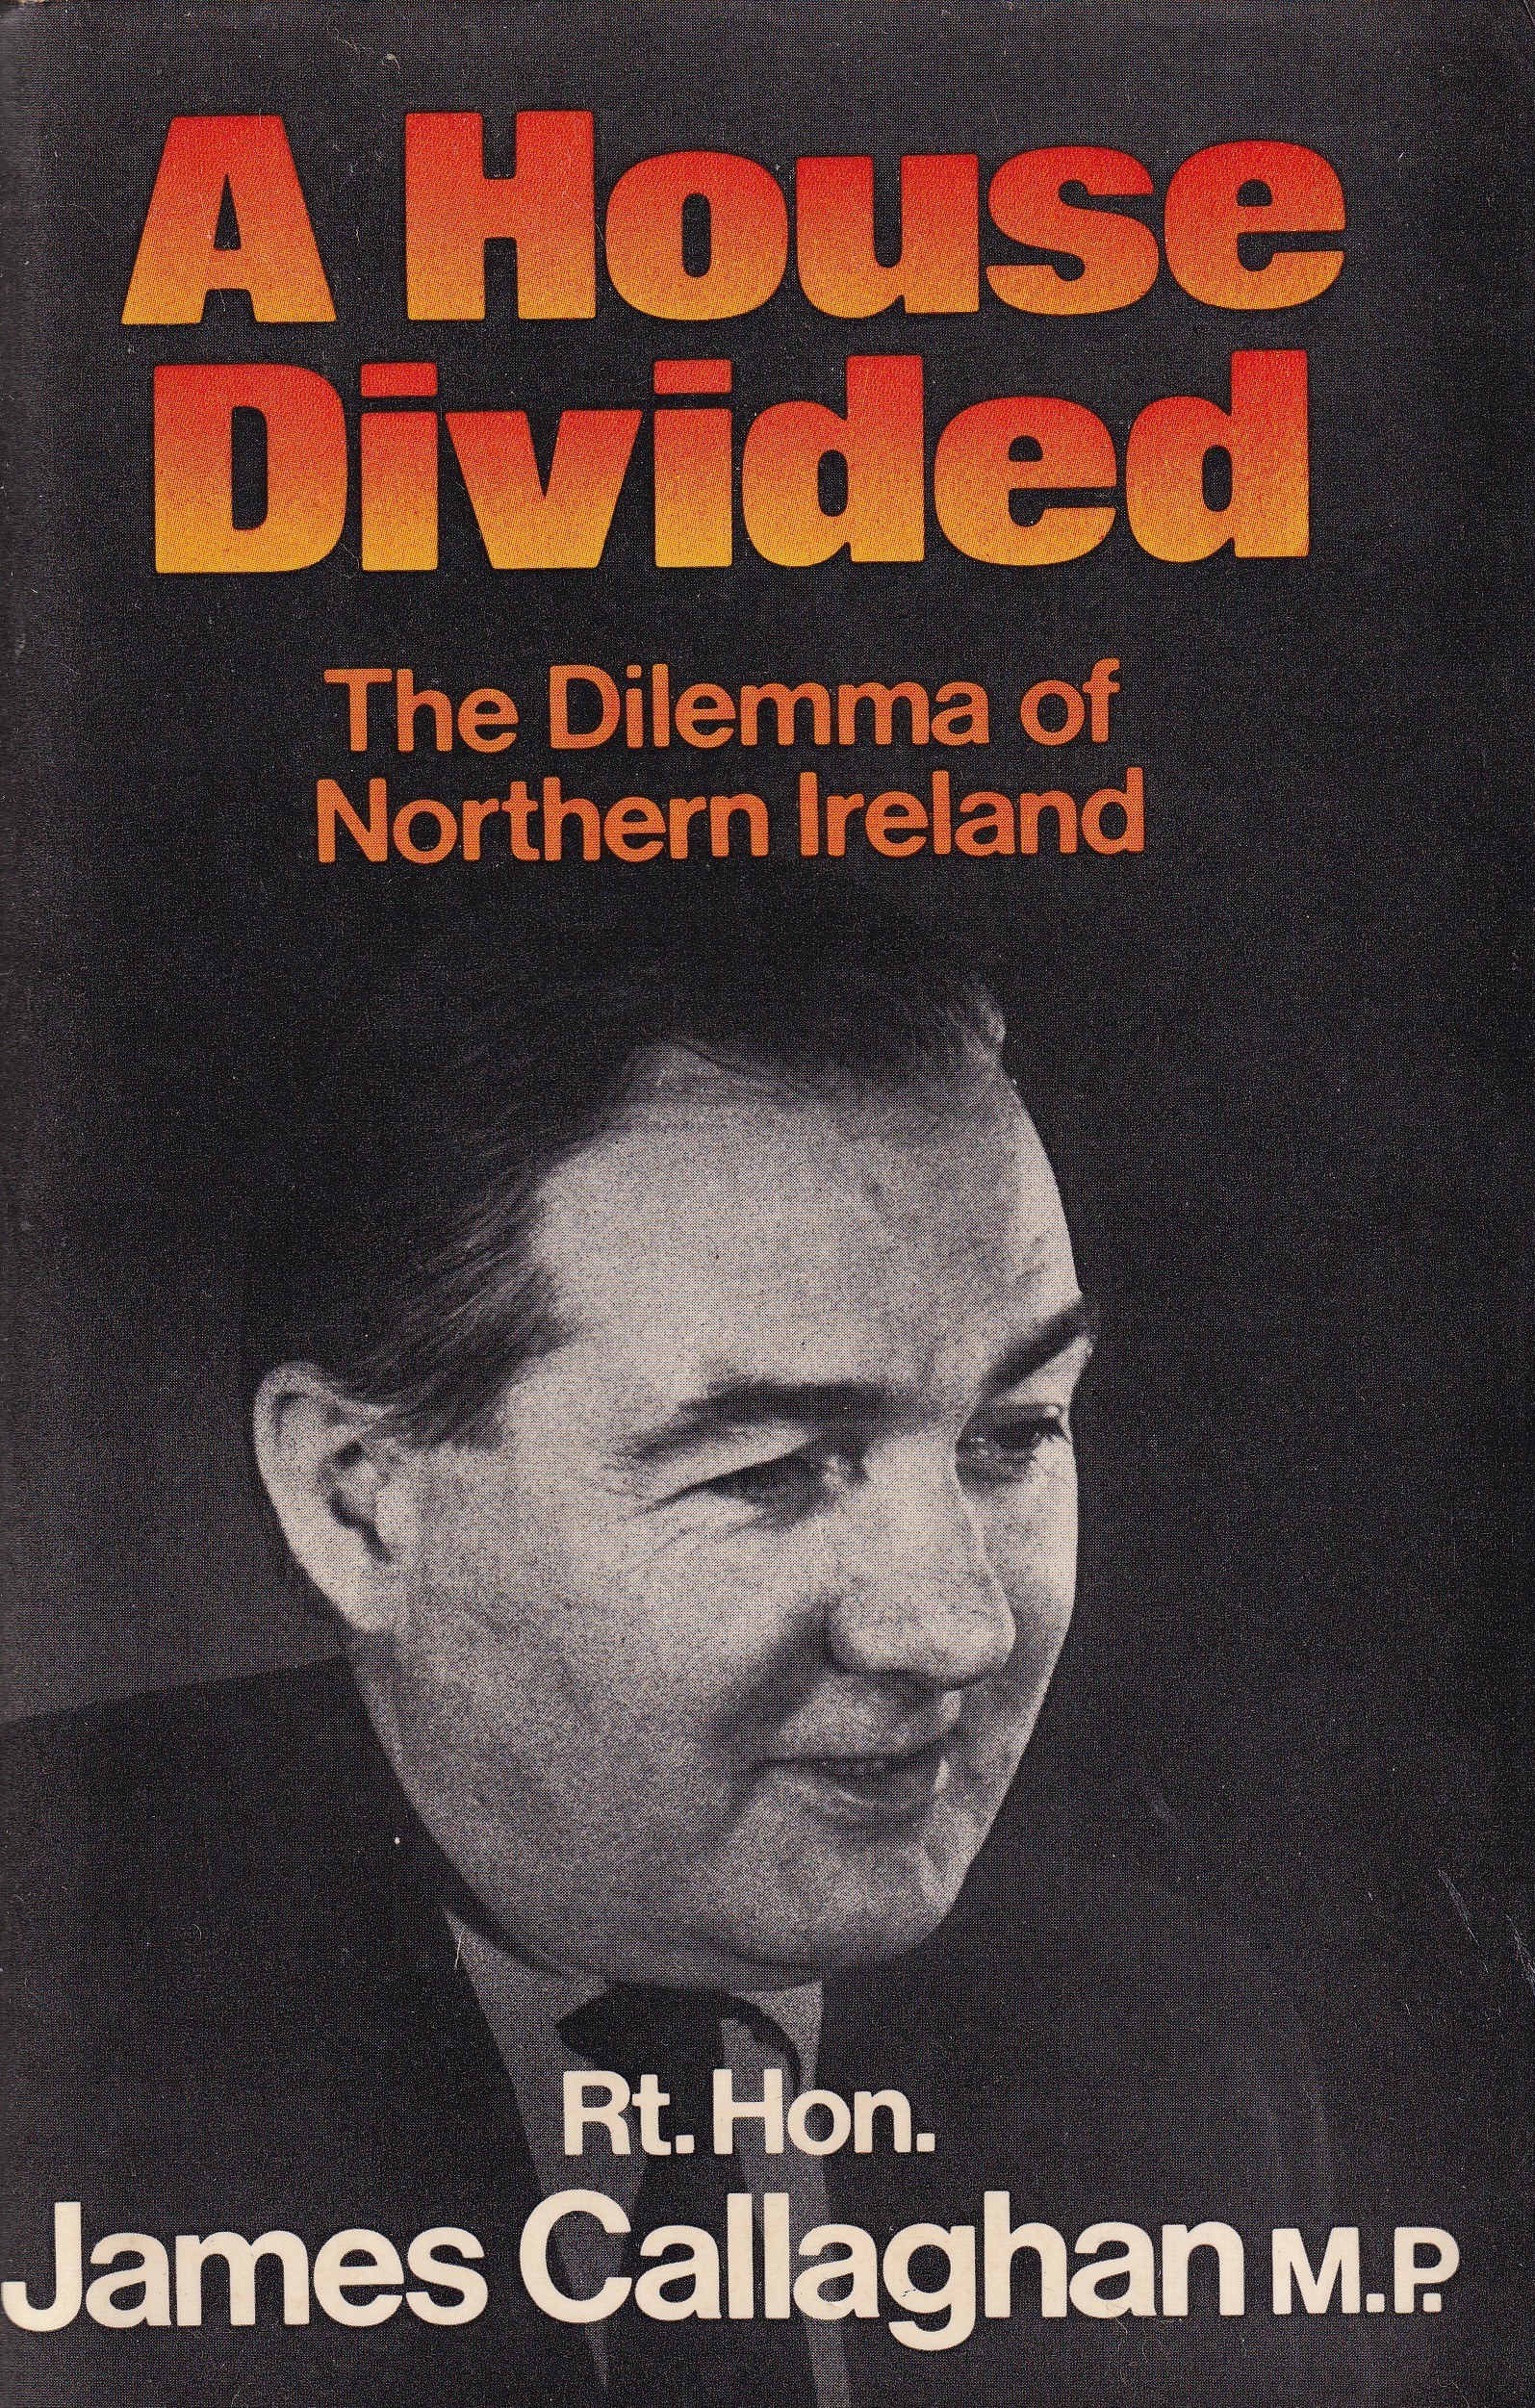 A House Divided: The Dilemma of Northern Ireland | James Callaghan | Charlie Byrne's